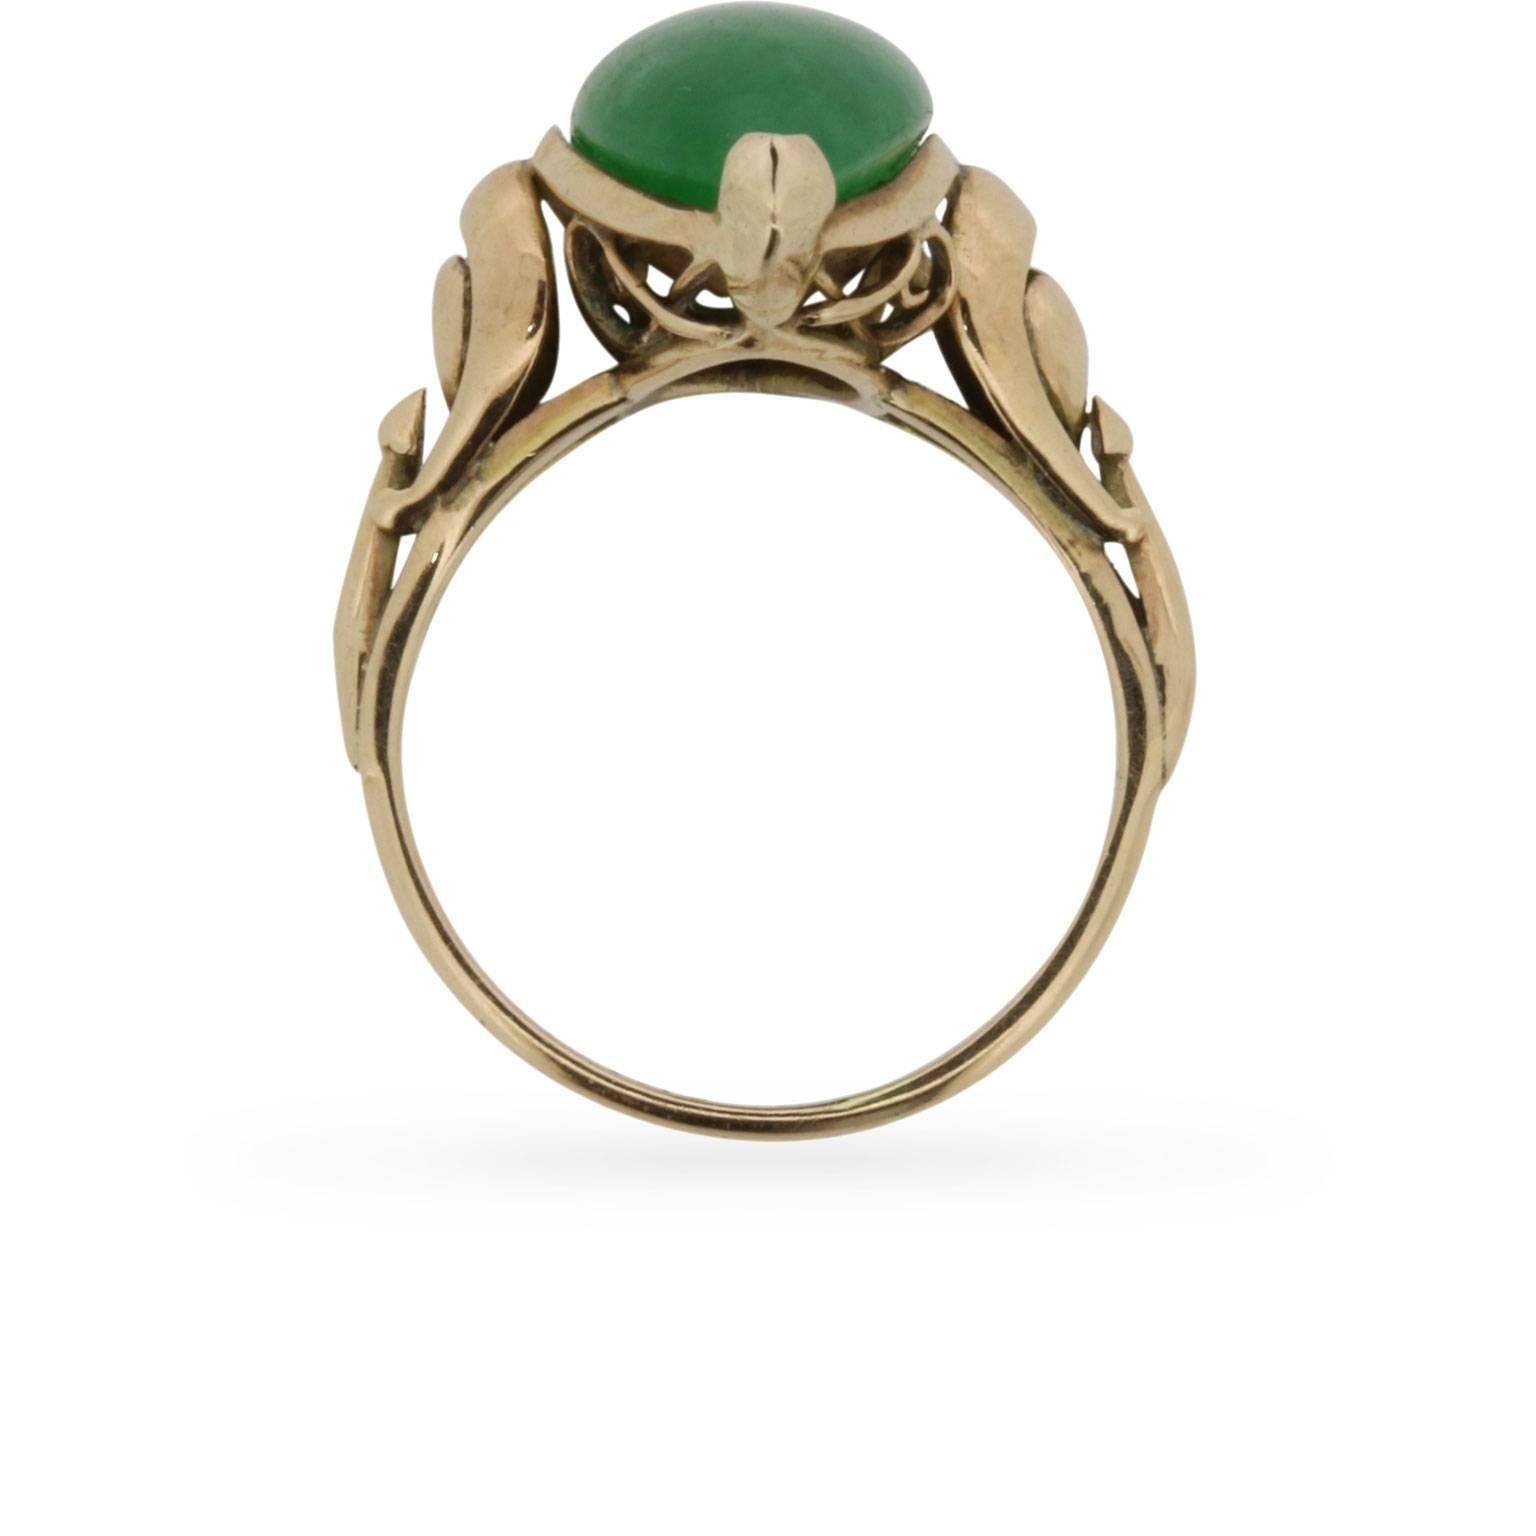 This beautiful, natural Jade, marquise cut, is set within a 14 carat rose gold mount. It dates back to the 1920s and is all handmade. The stone has a rich green colour to it, which is highlighted wonderfully by the rose gold band and shank.

The